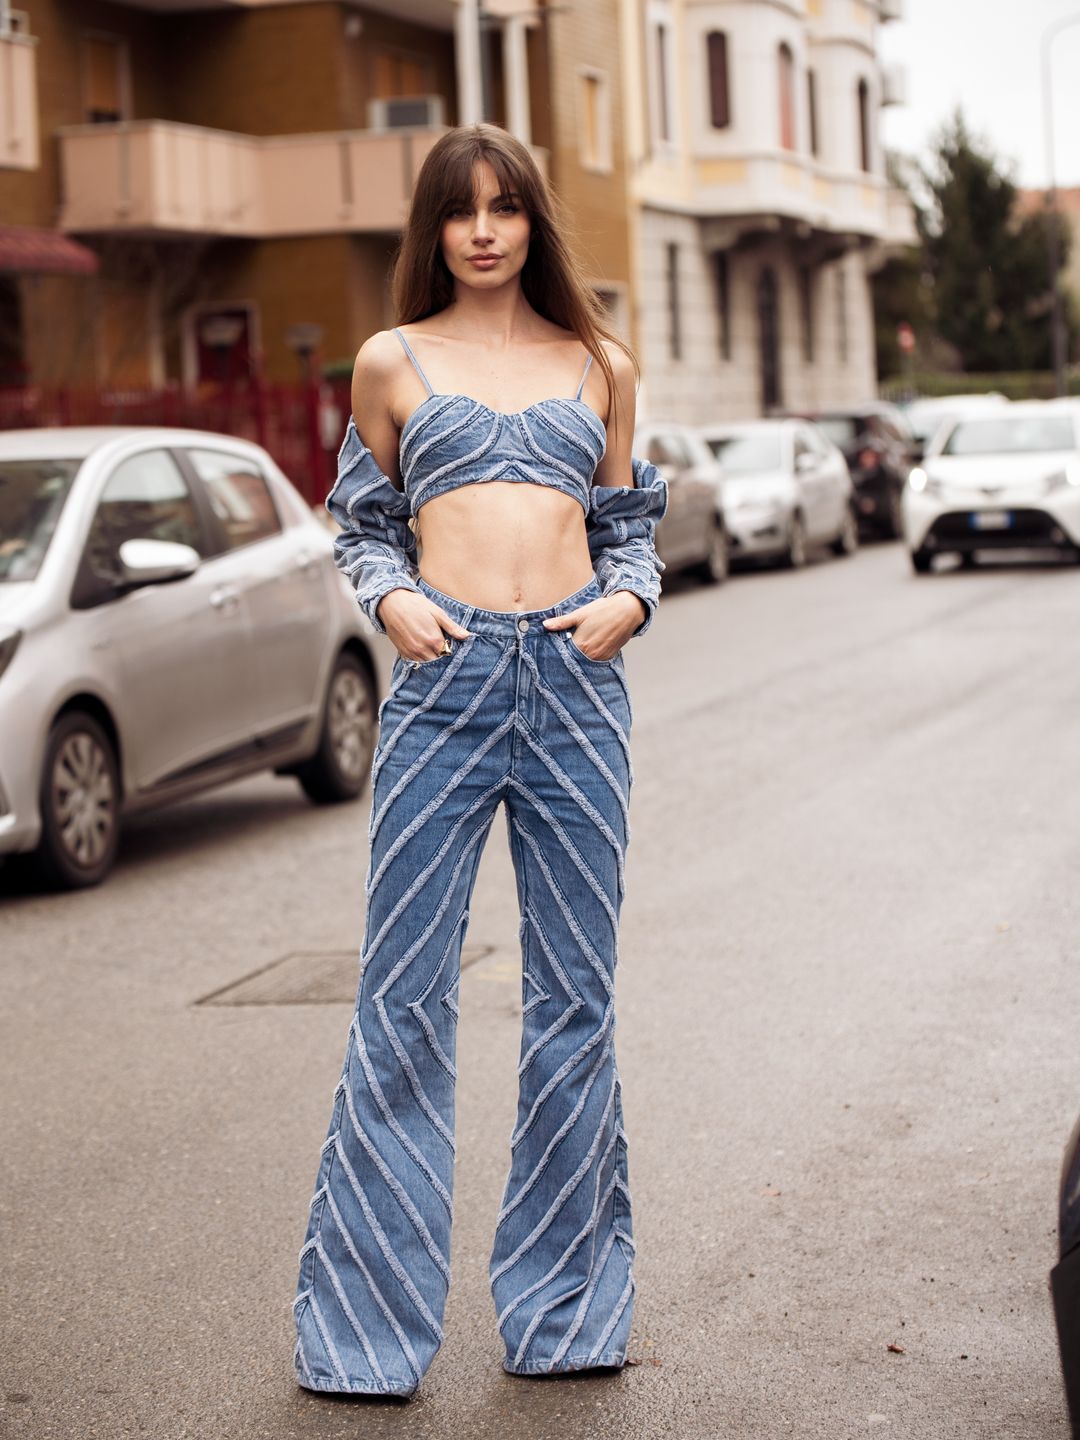 Bell Bottoms Outfit  Bell bottoms outfit, Black bell bottoms outfit